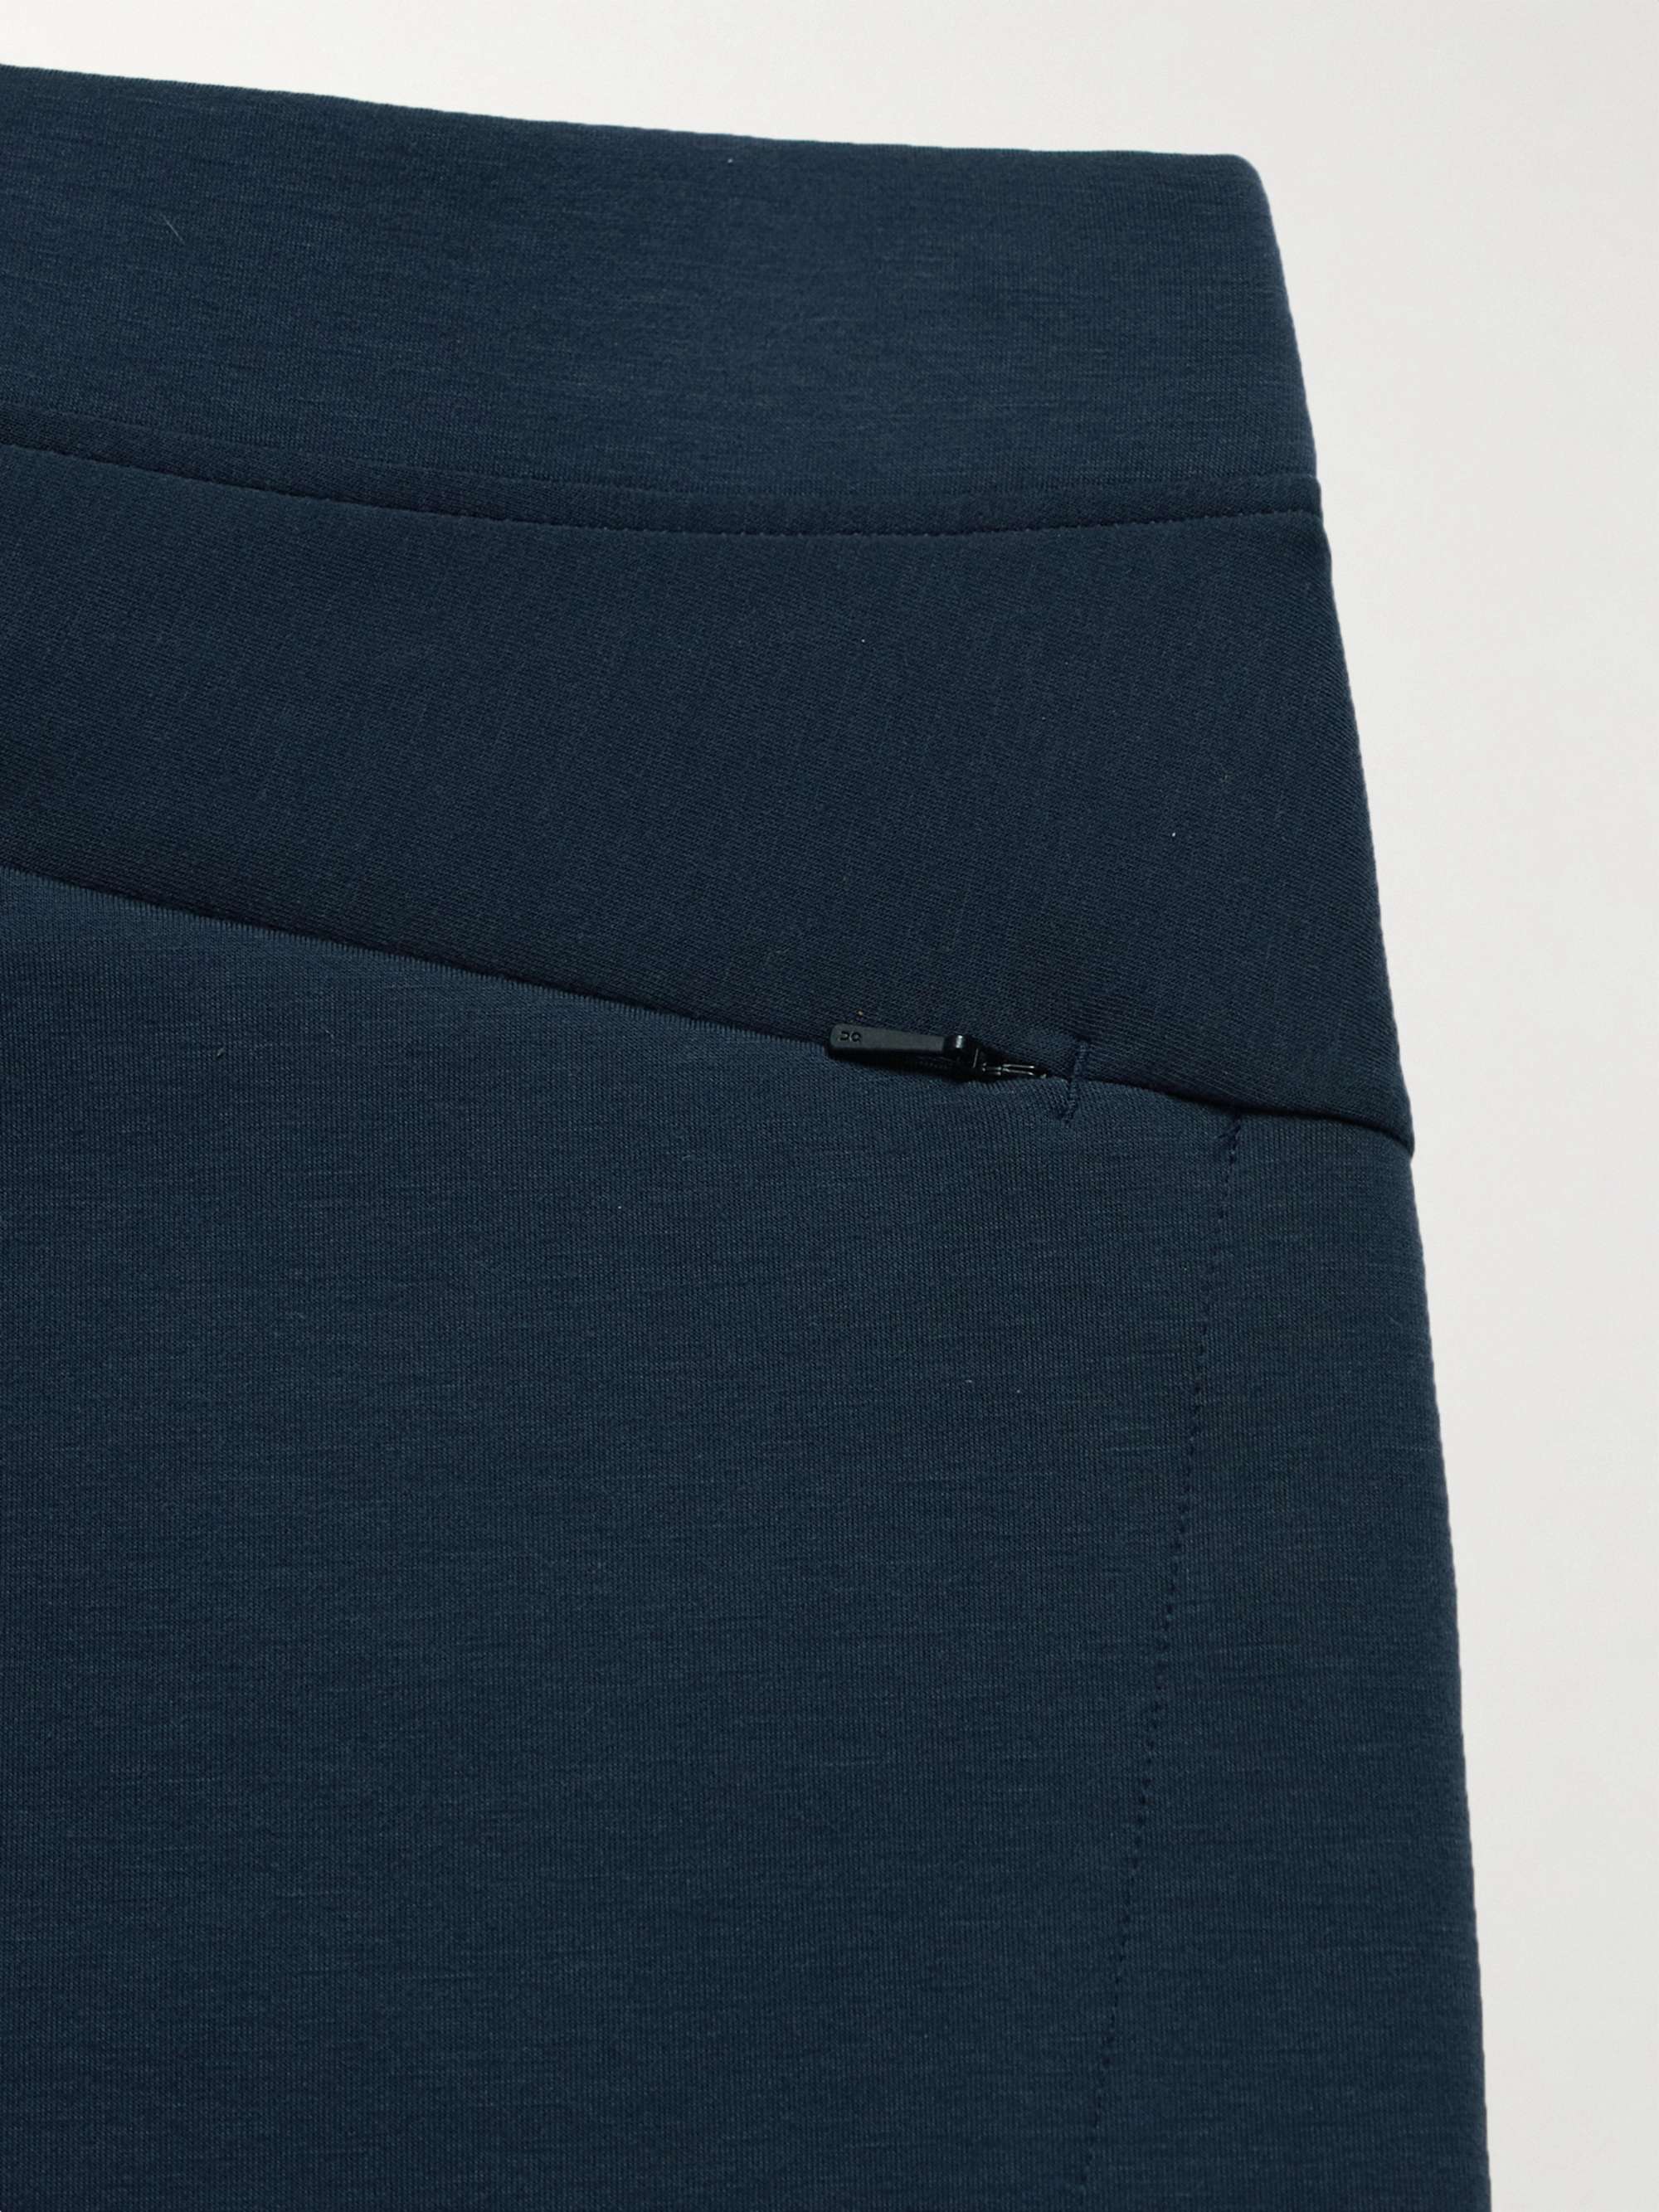 ON Slim-Fit Tapered Recycled Jersey Sweatpants